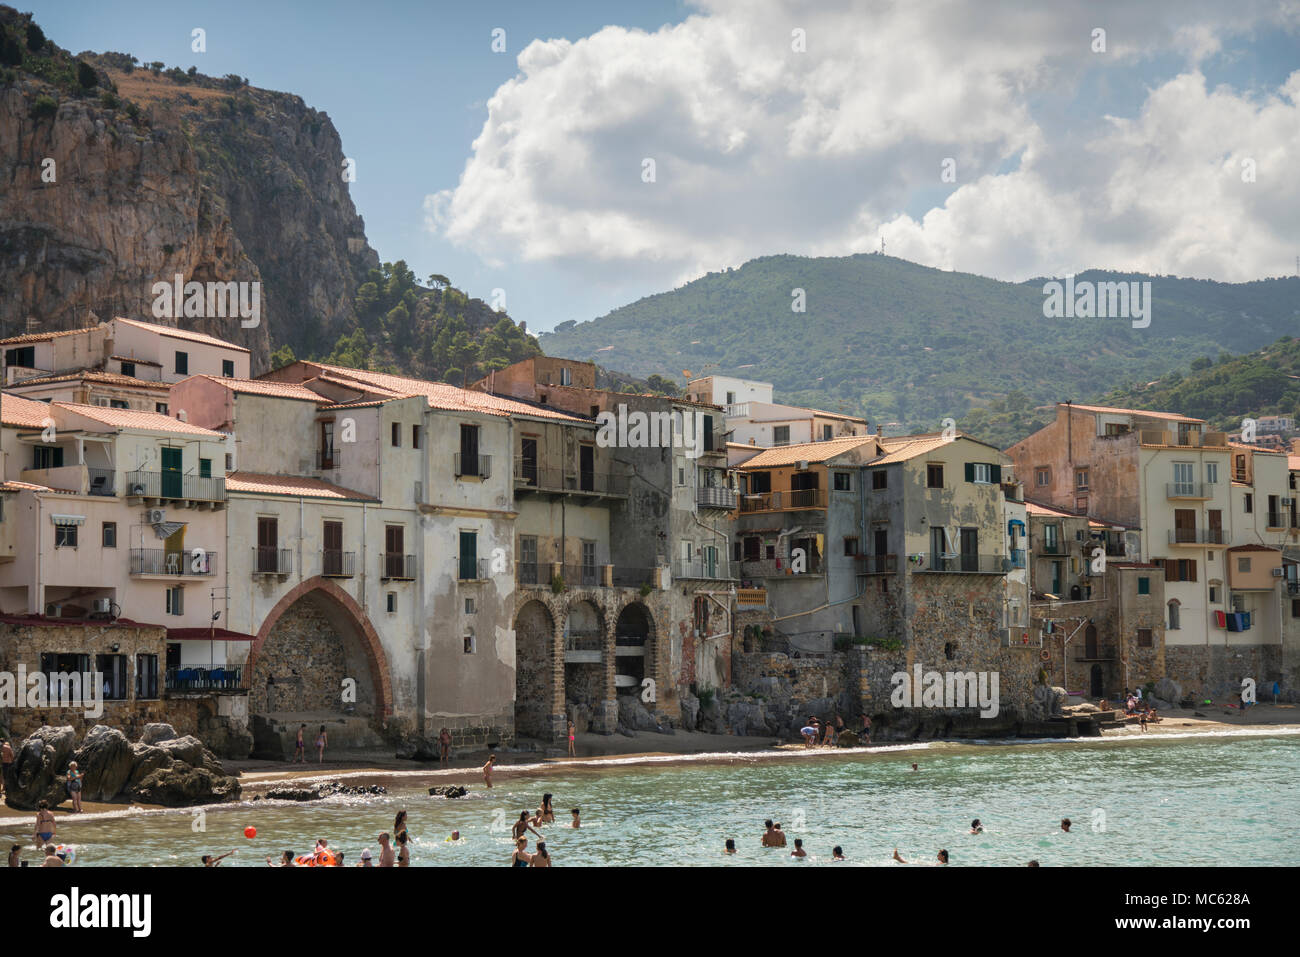 Rocky headland and historic buildings overlooking the sandy beach at Cefalu, Sicily, Italy, with holidaymakers swimming in the sea. Stock Photo